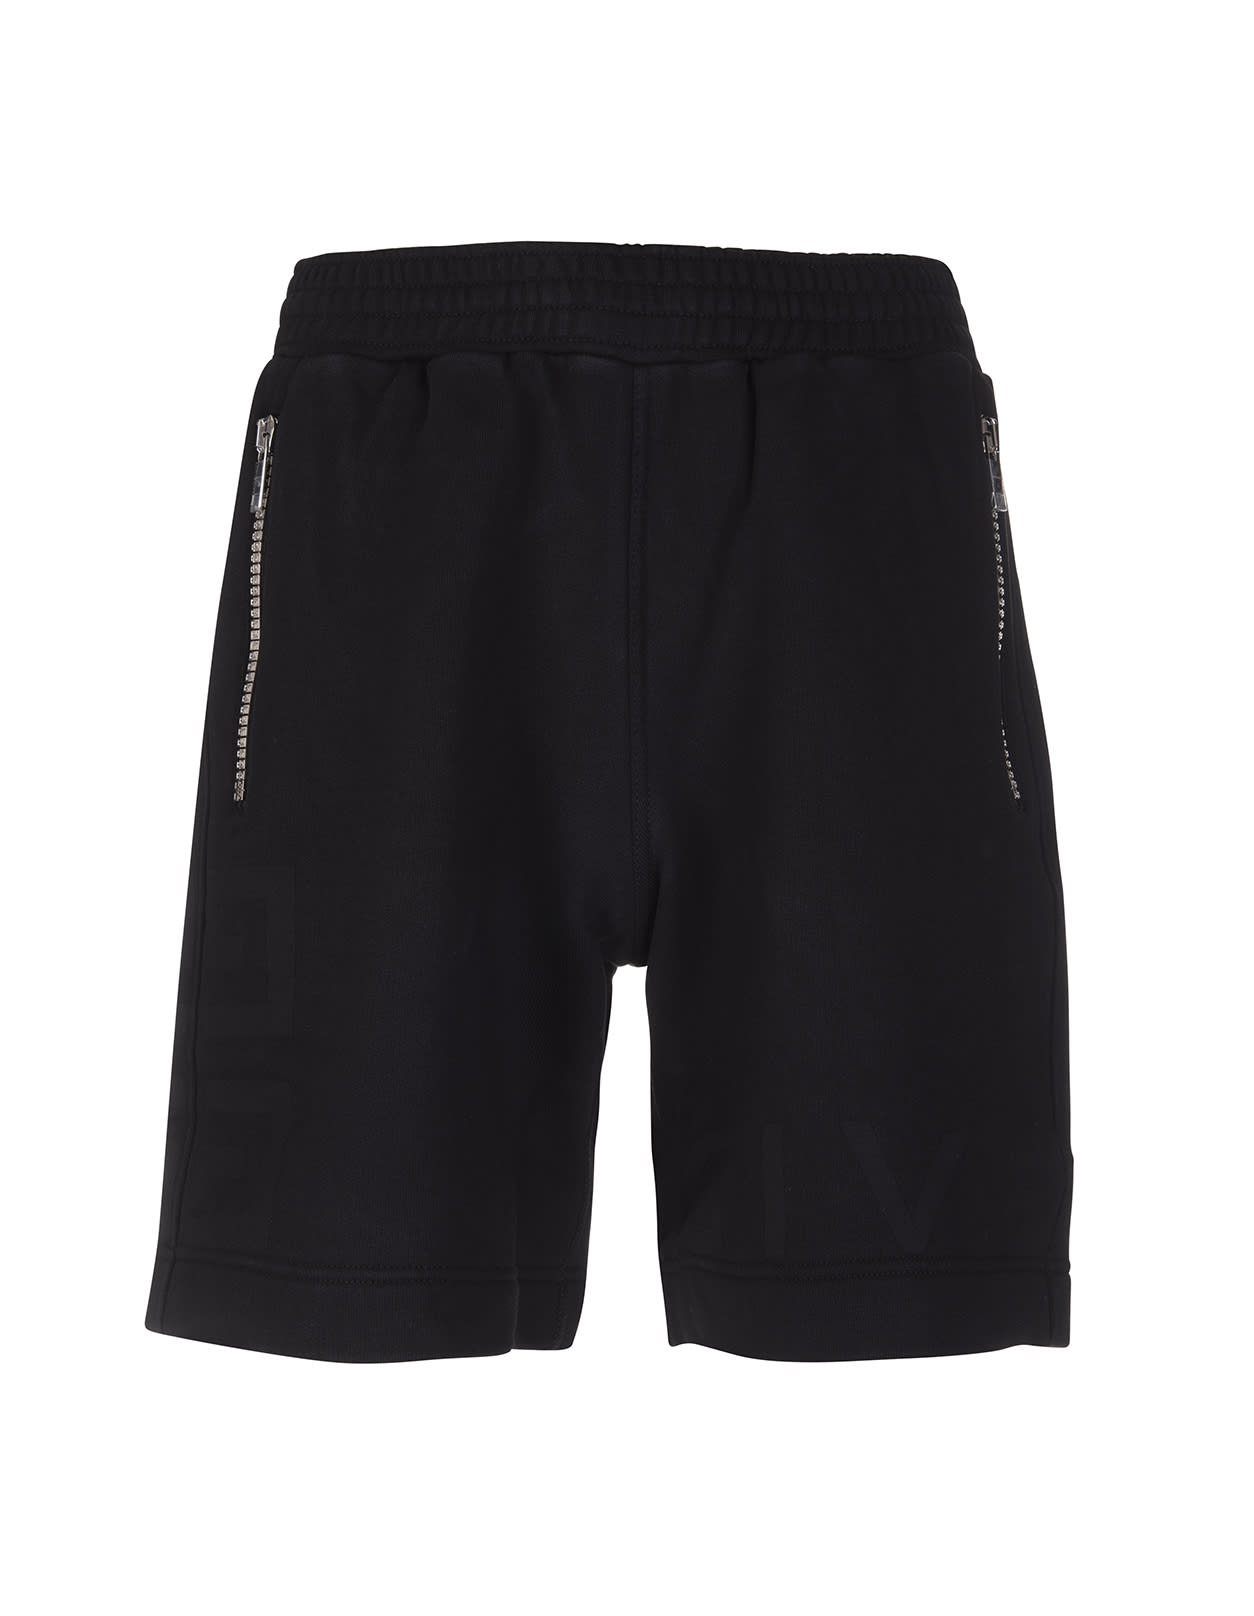 GIVENCHY MAN BLACK SPORTS SHORTS WITH 4G ZIP